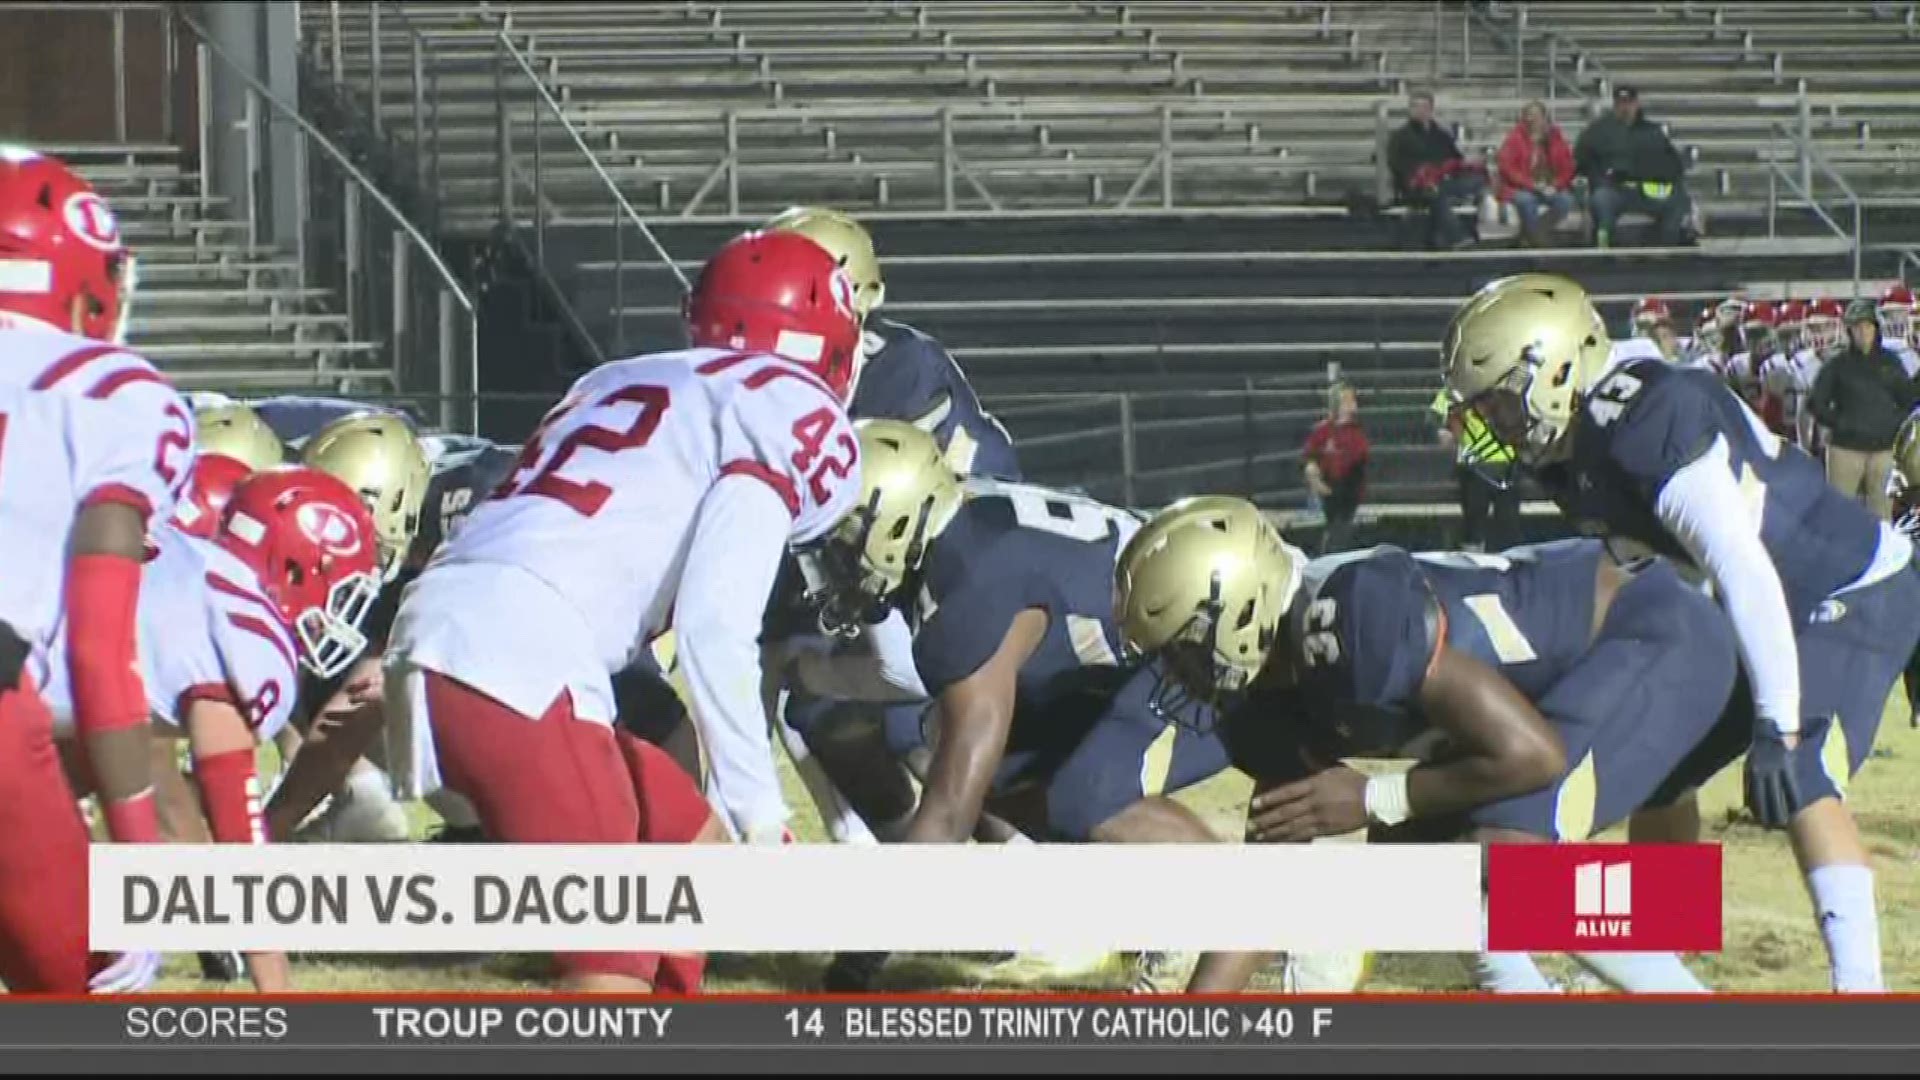 Dacula wins 49 to 18.